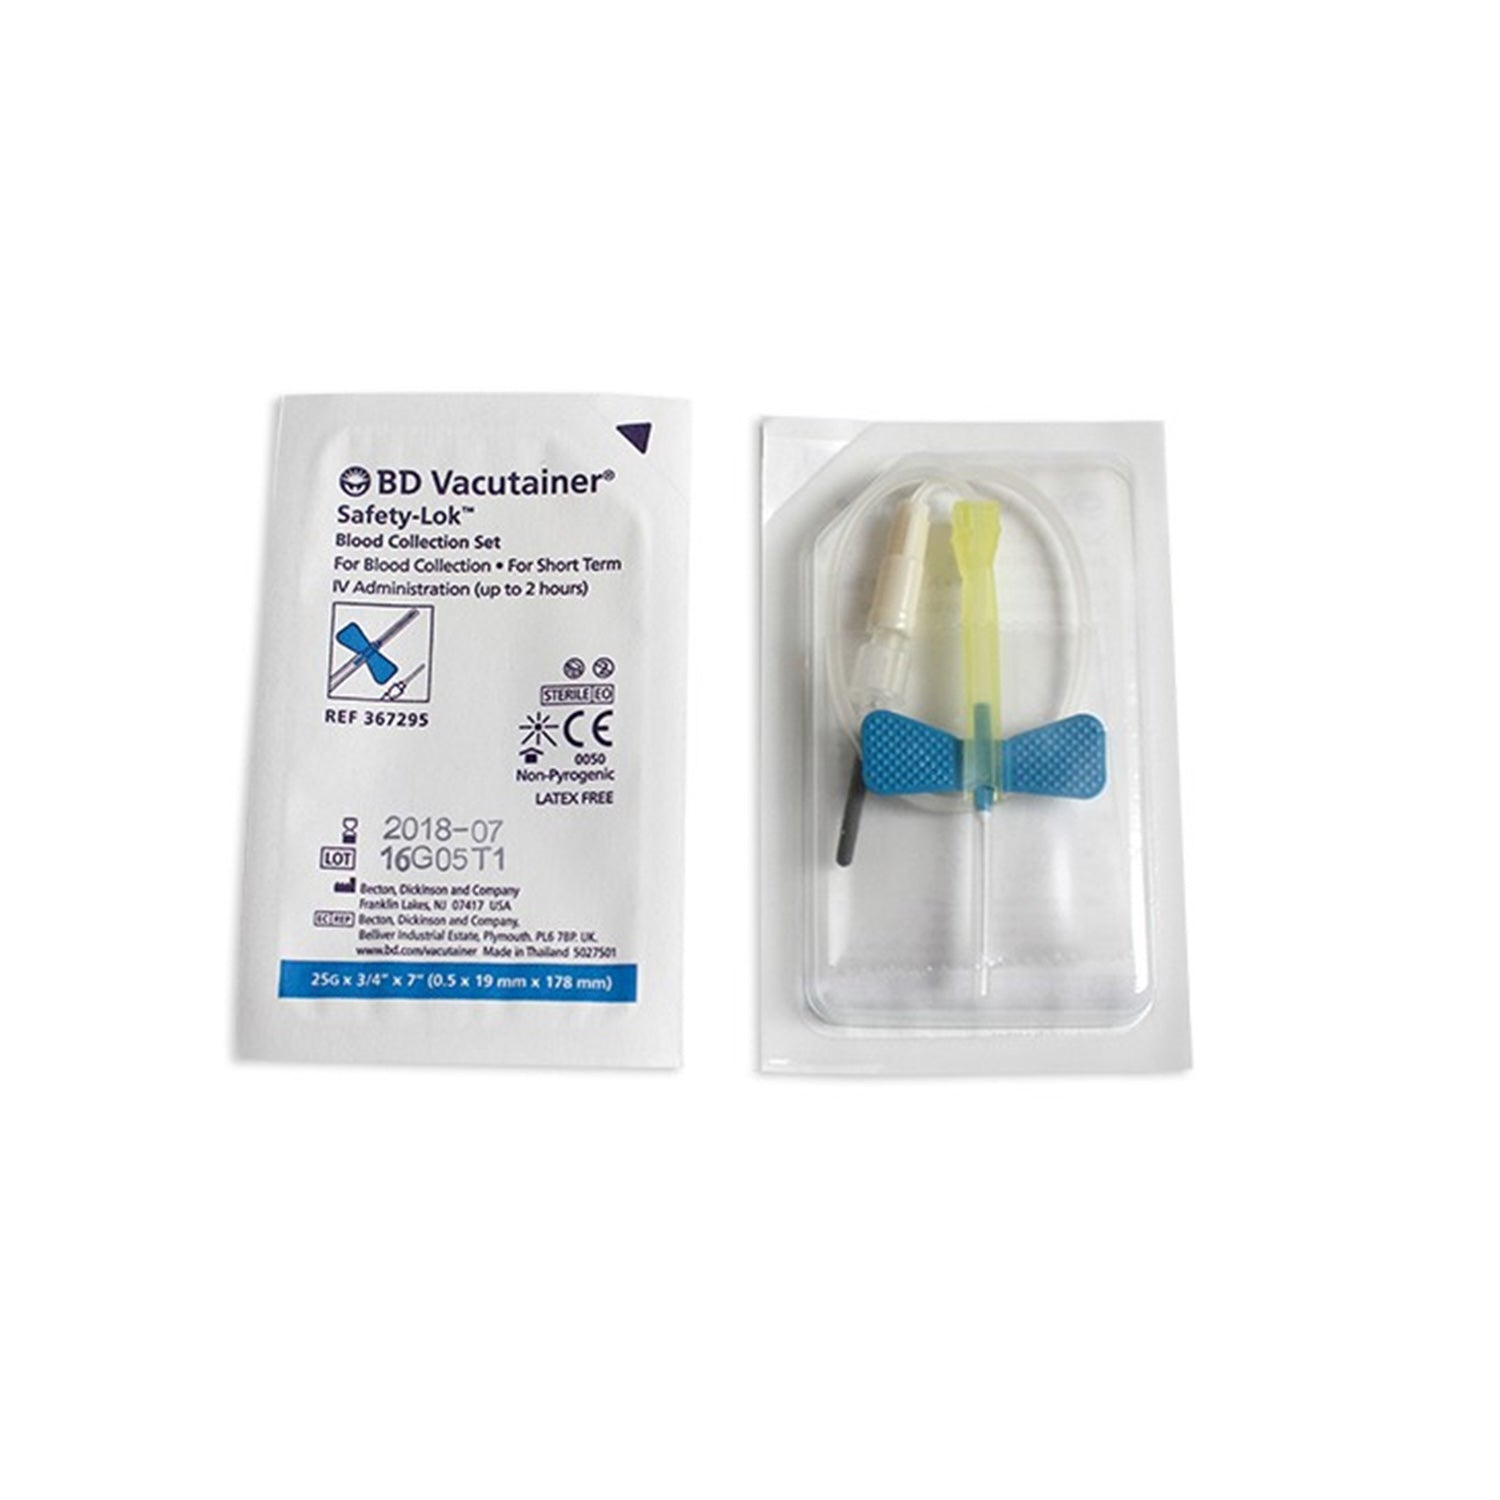 BD Vacutainer Safety Lok Blood Collection System | 0.75" Needle | 25G x 7" Tubing | Pack of 50 (3)